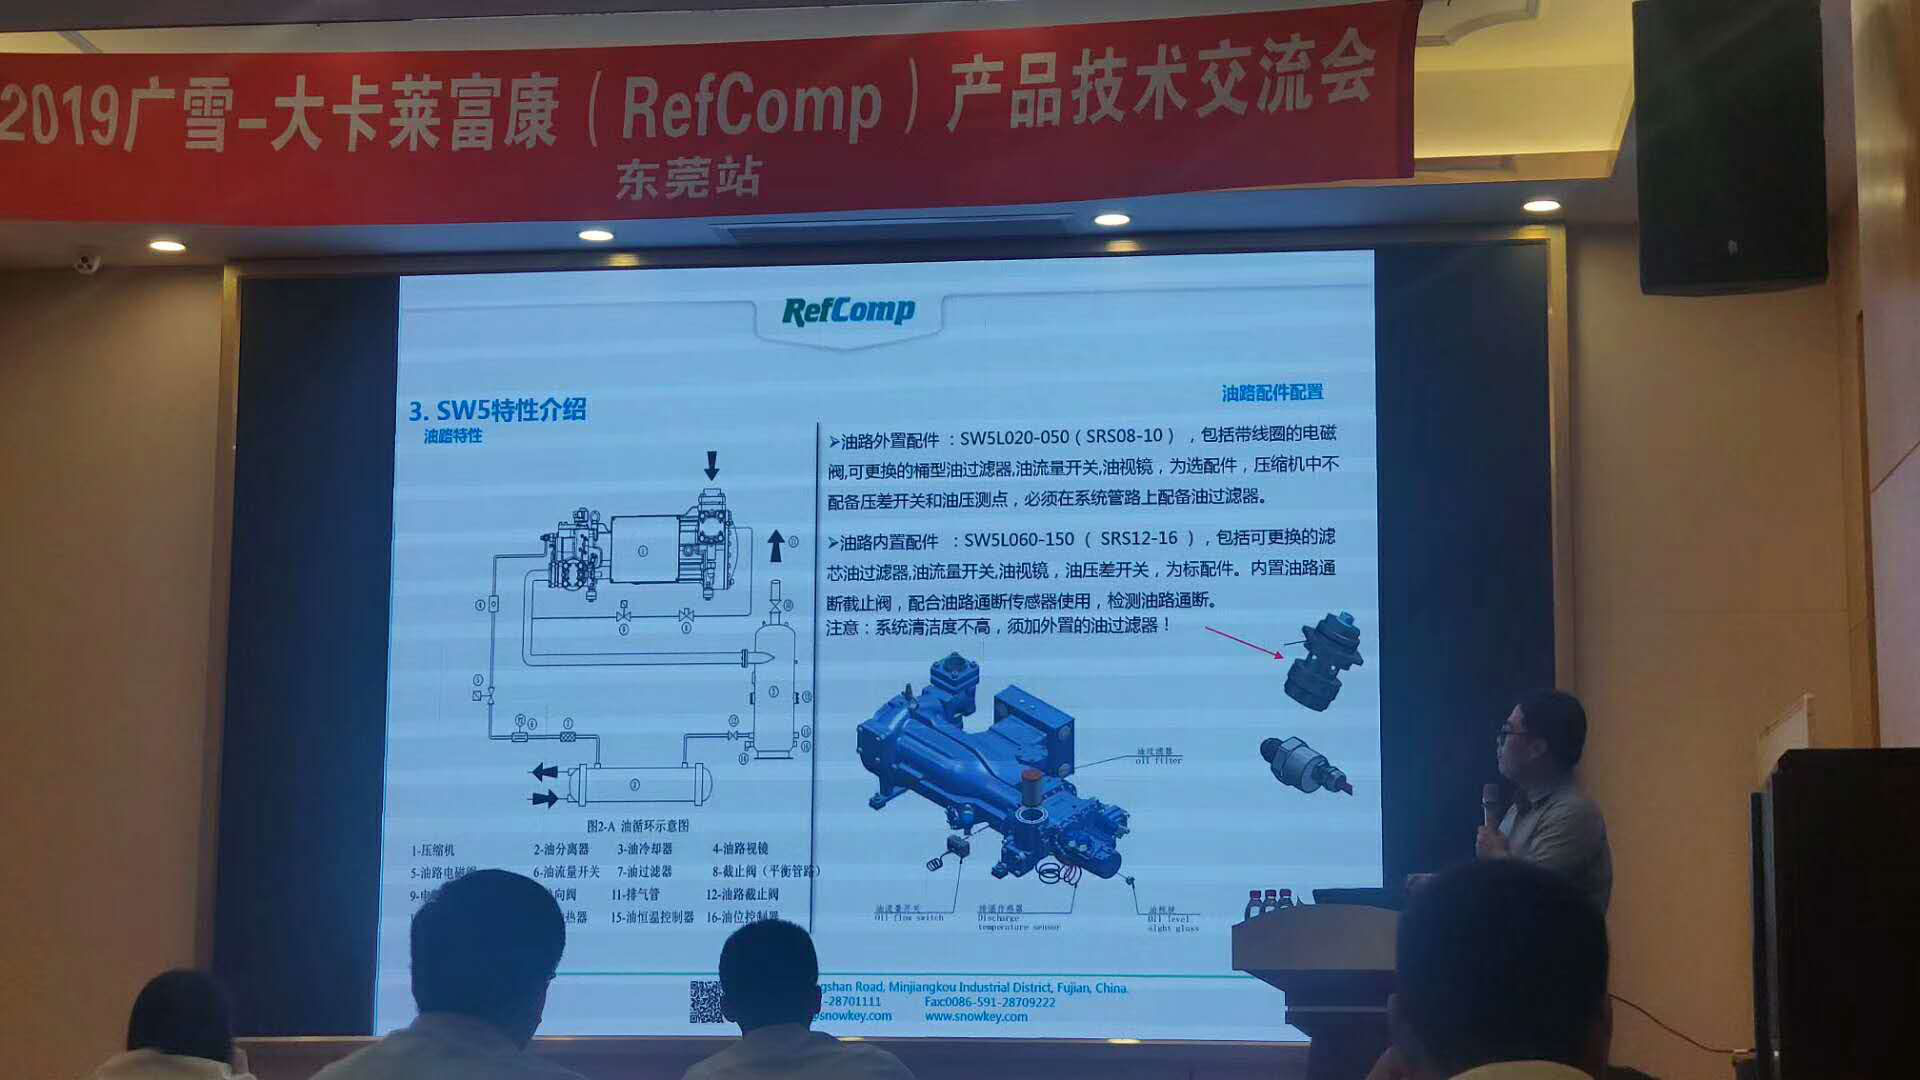 2019 Guangxue-Daka- RefComp compressor Product Technology Exchange Conference - Conference Report